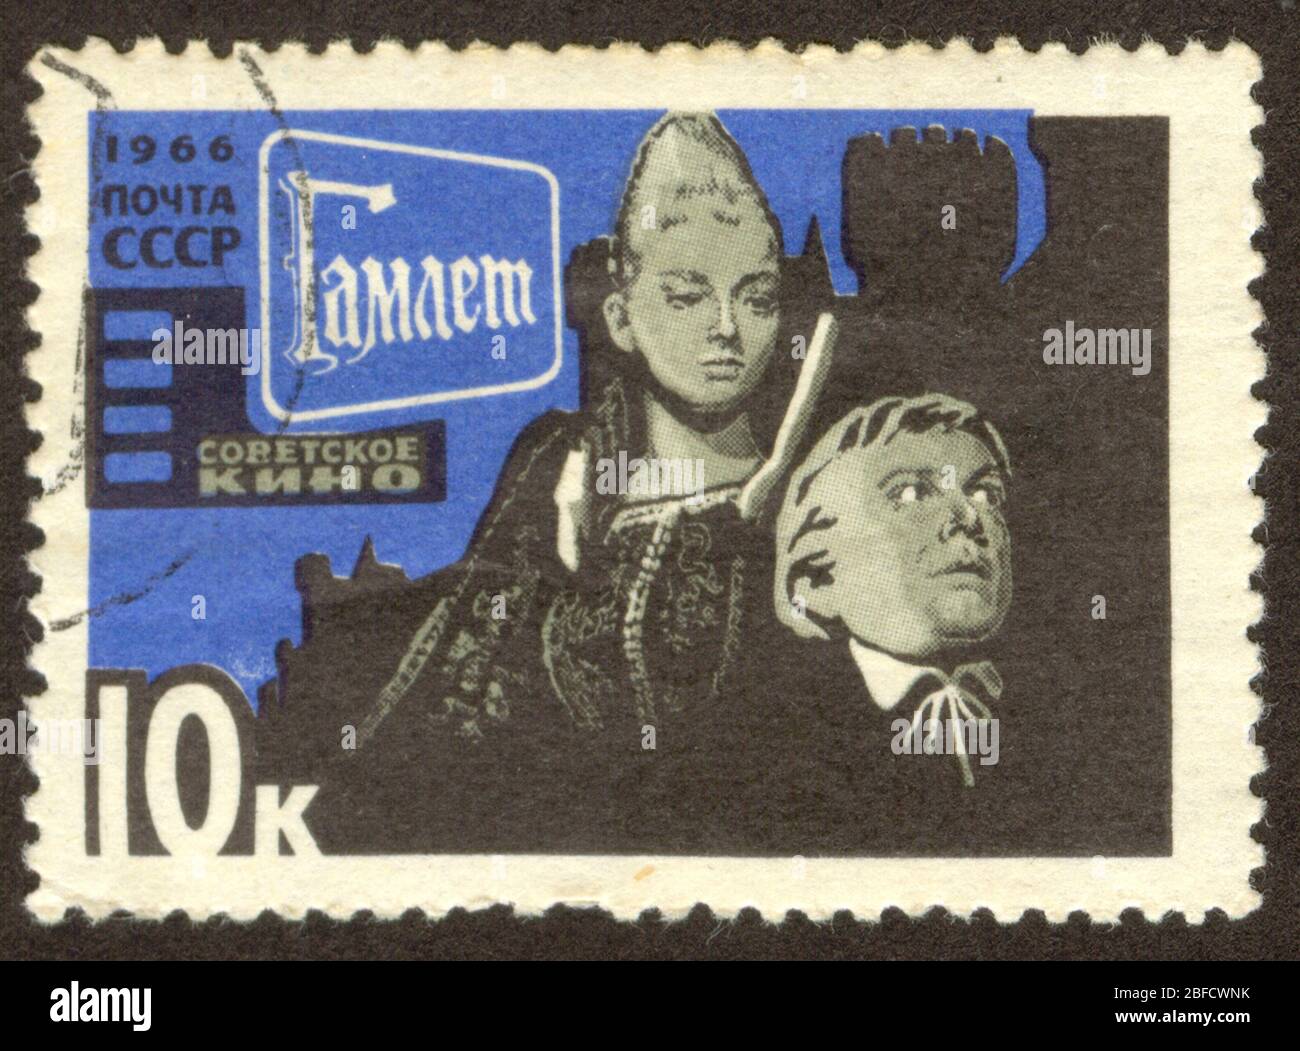 RUSSIA - CIRCA 1966: stamp printed by Russia, shows film Hamlet, circa 1966. Stock Photo